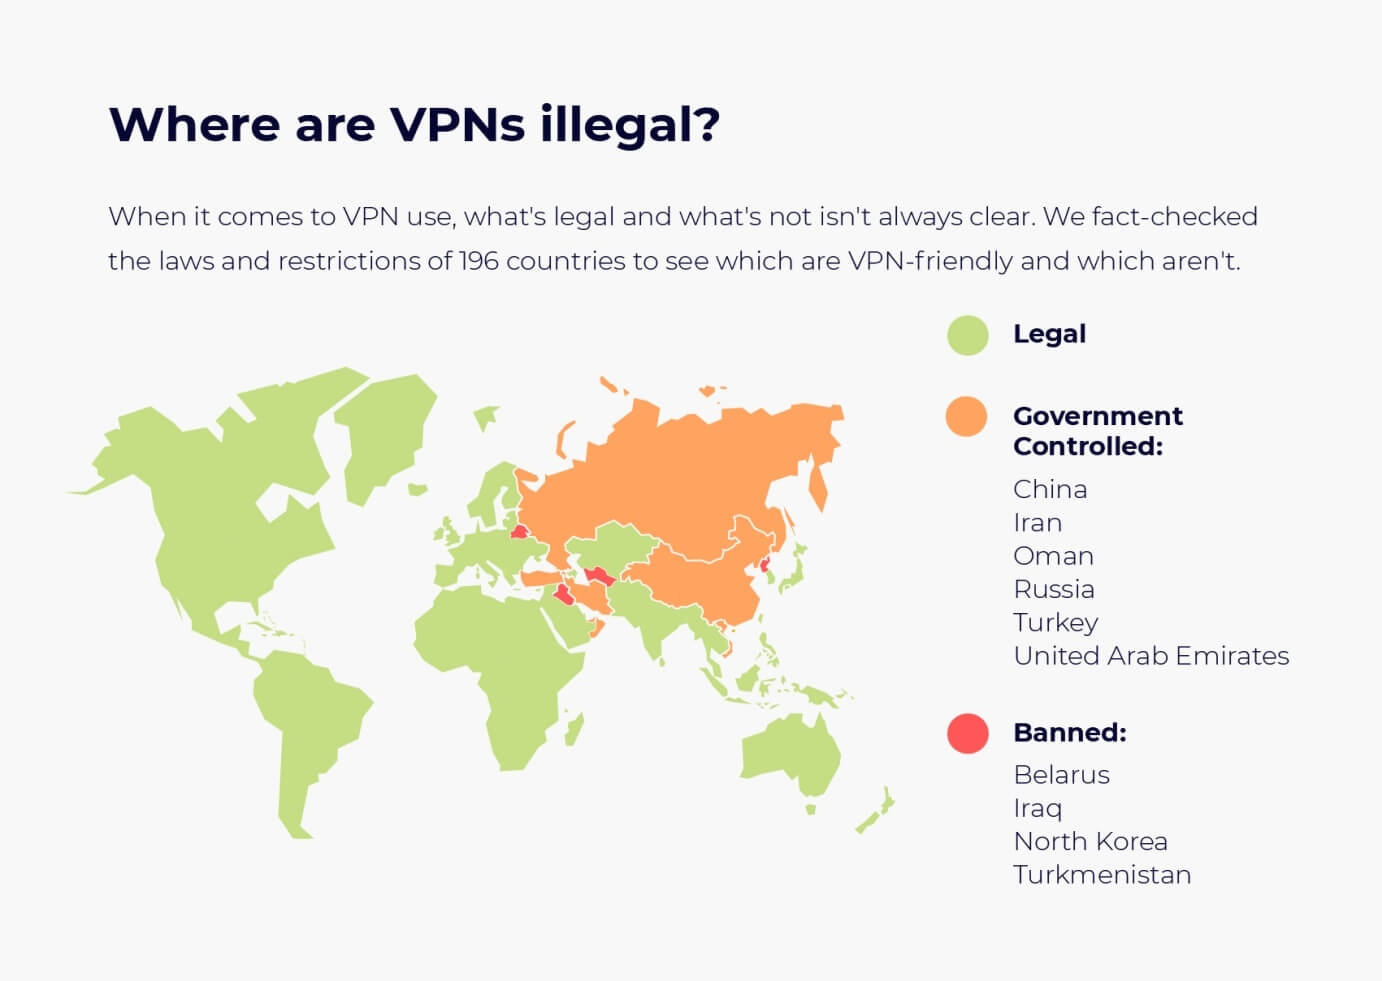 Is VPN legal in your country?